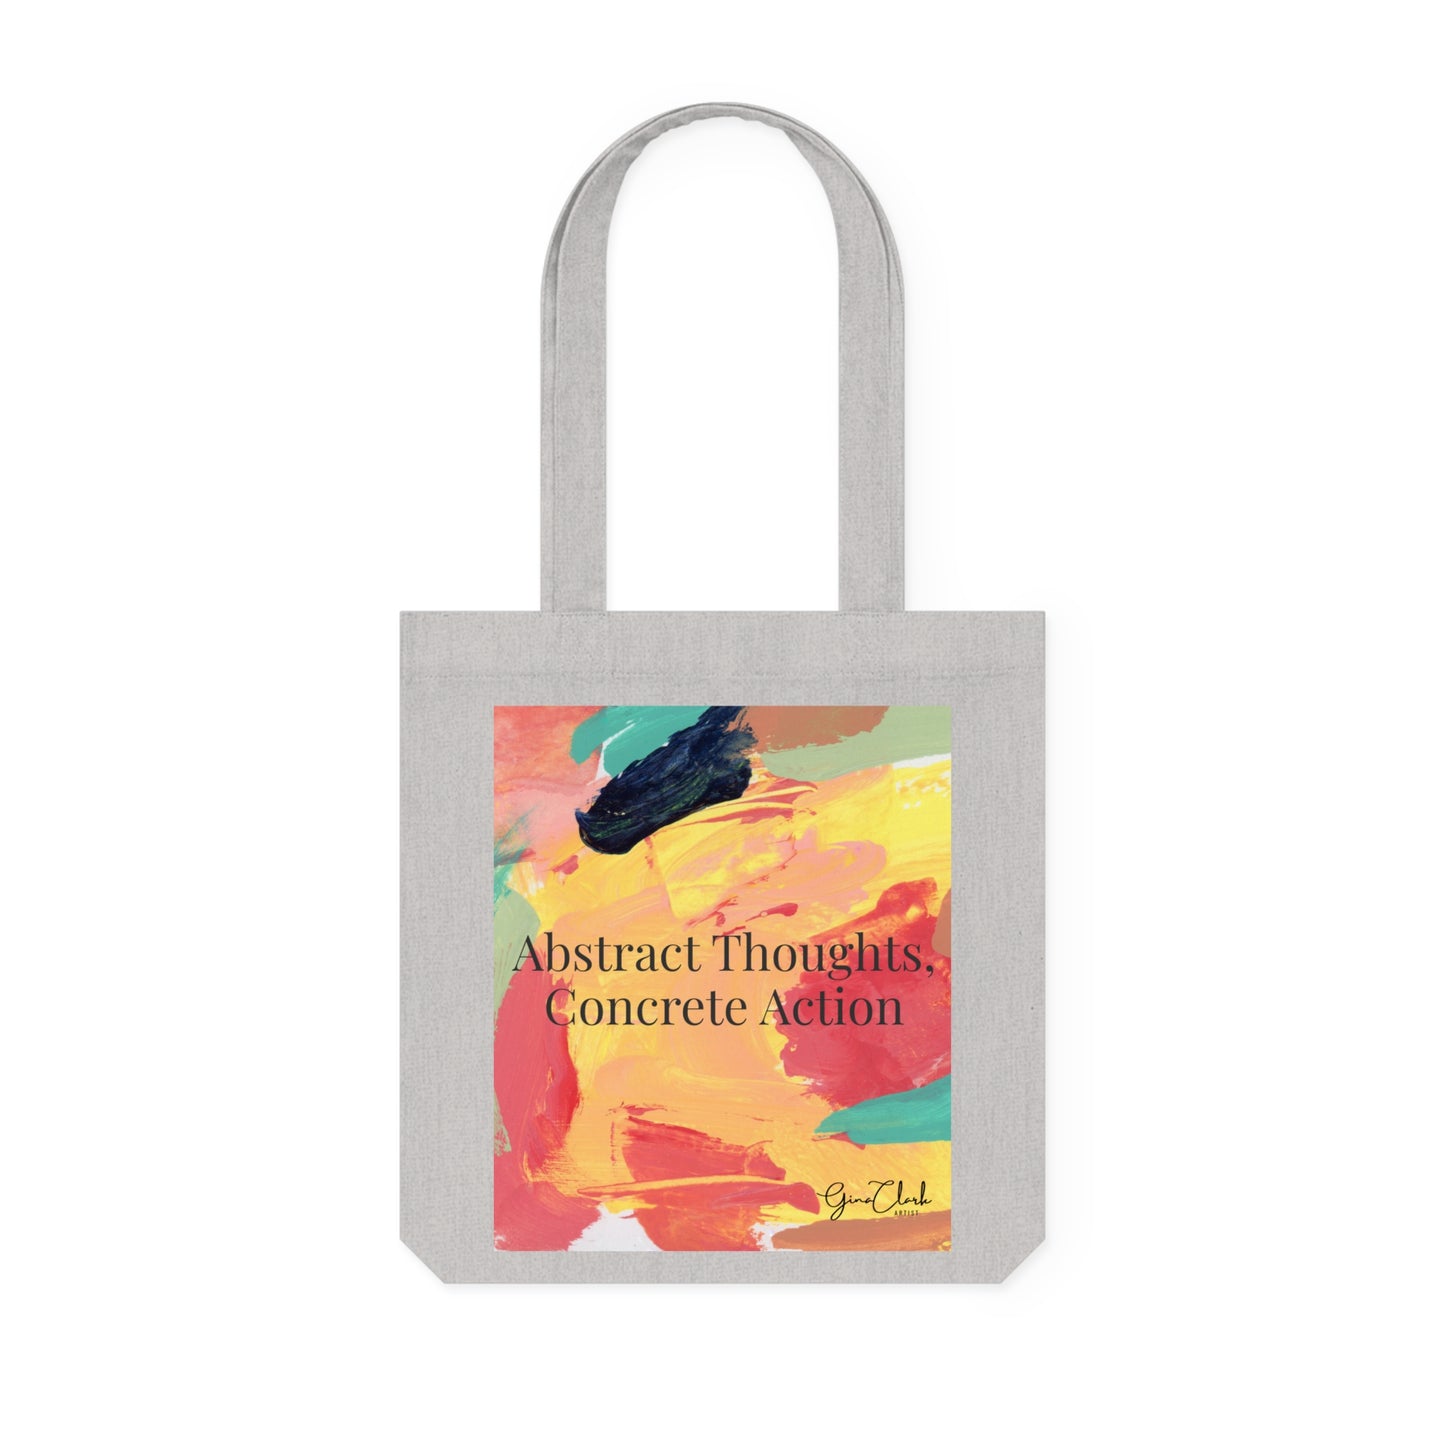 Abstract Thoughts, Concrete Action: Eco-Friendly Statement Tote